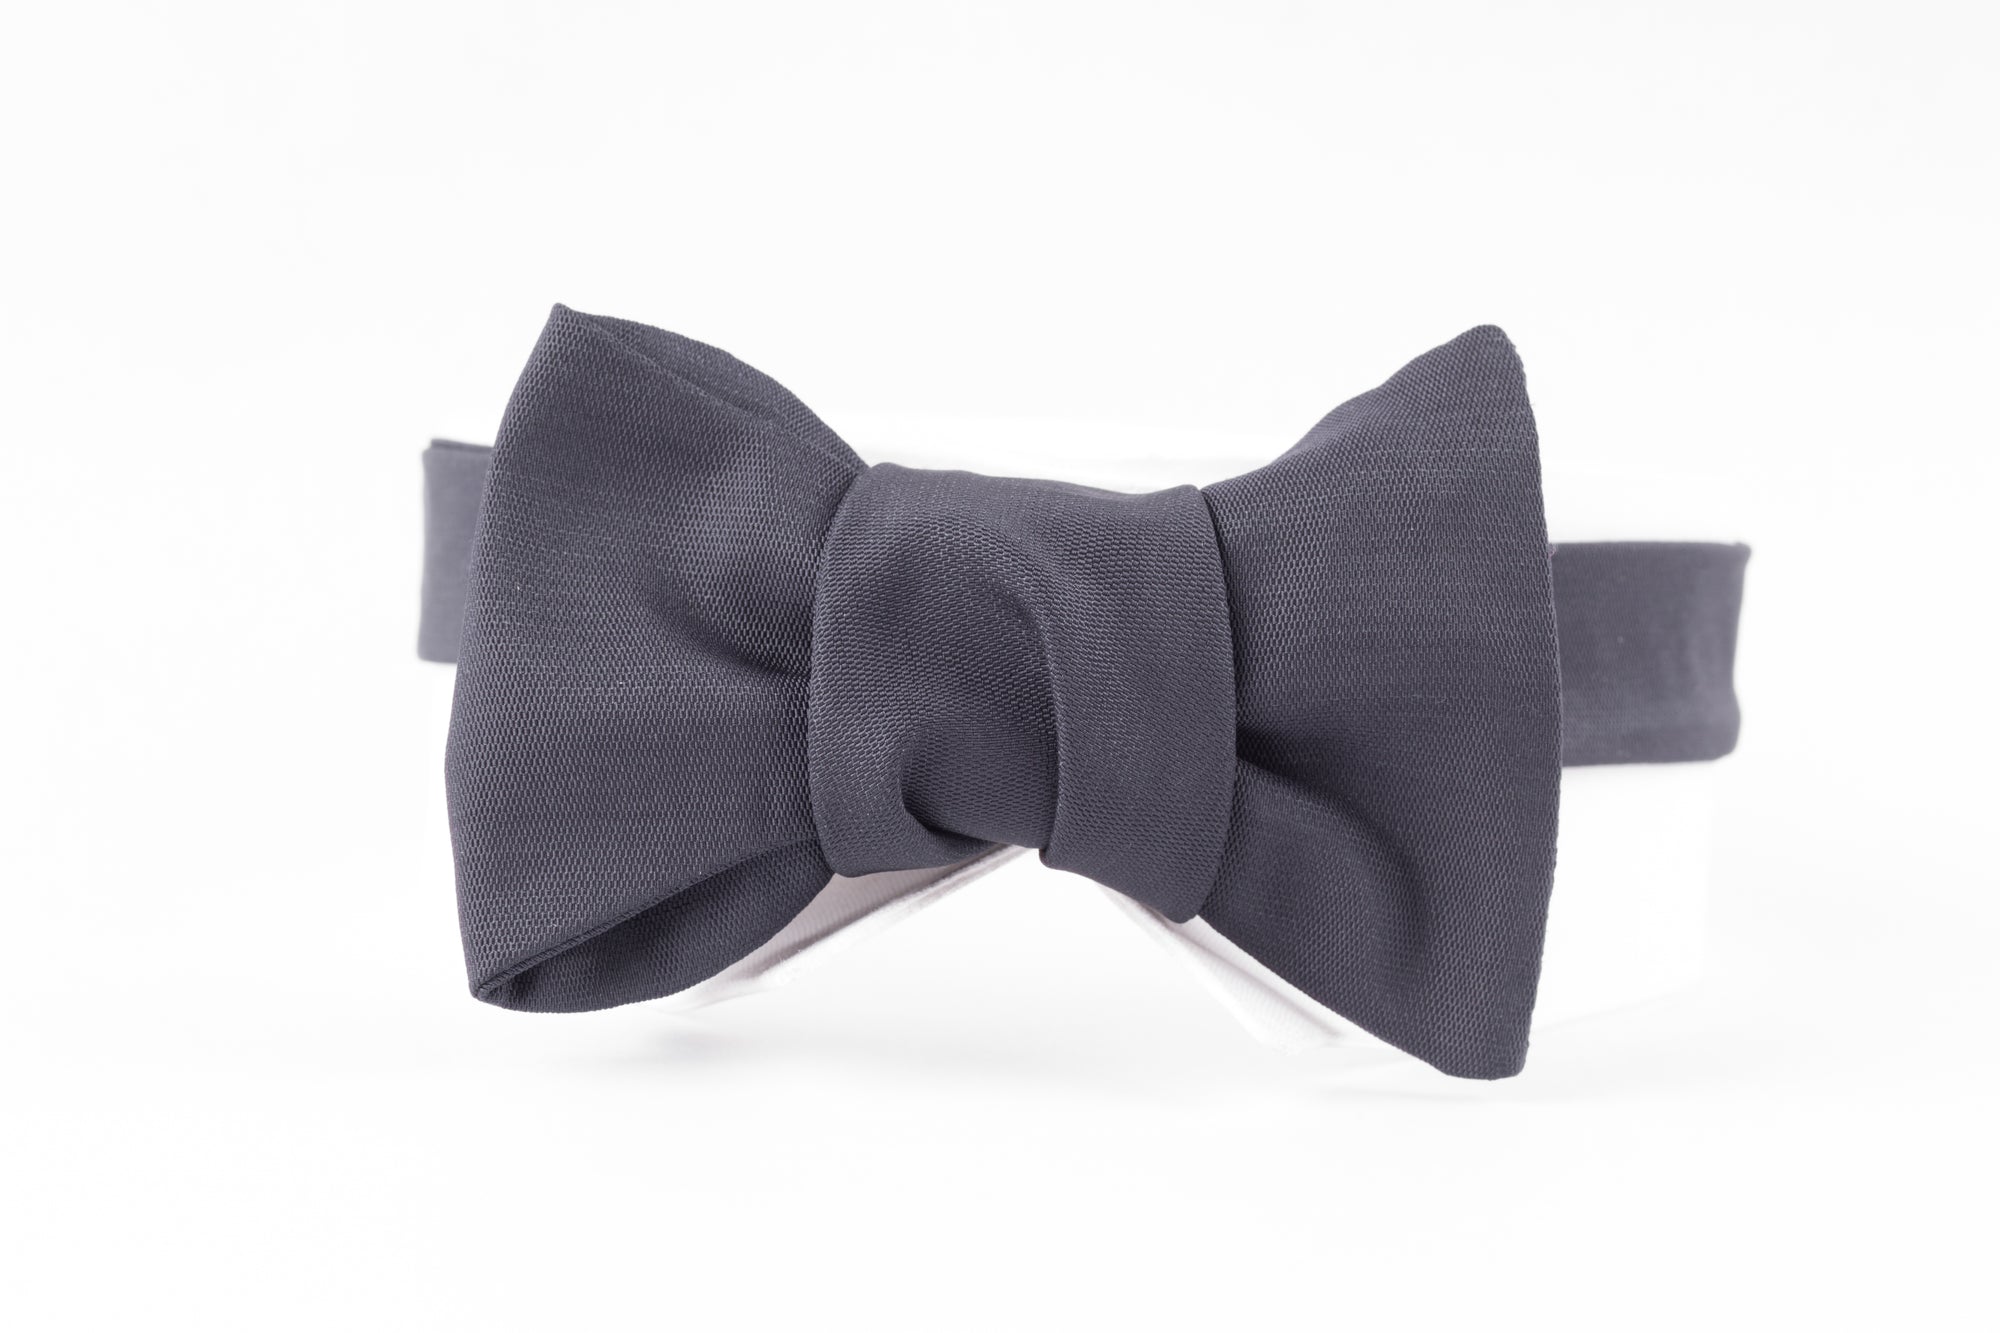 A Sovereign Grade Jumbo Barathea Butterfly Bow Tie from KirbyAllison.com on a white background, perfect for formal occasions.